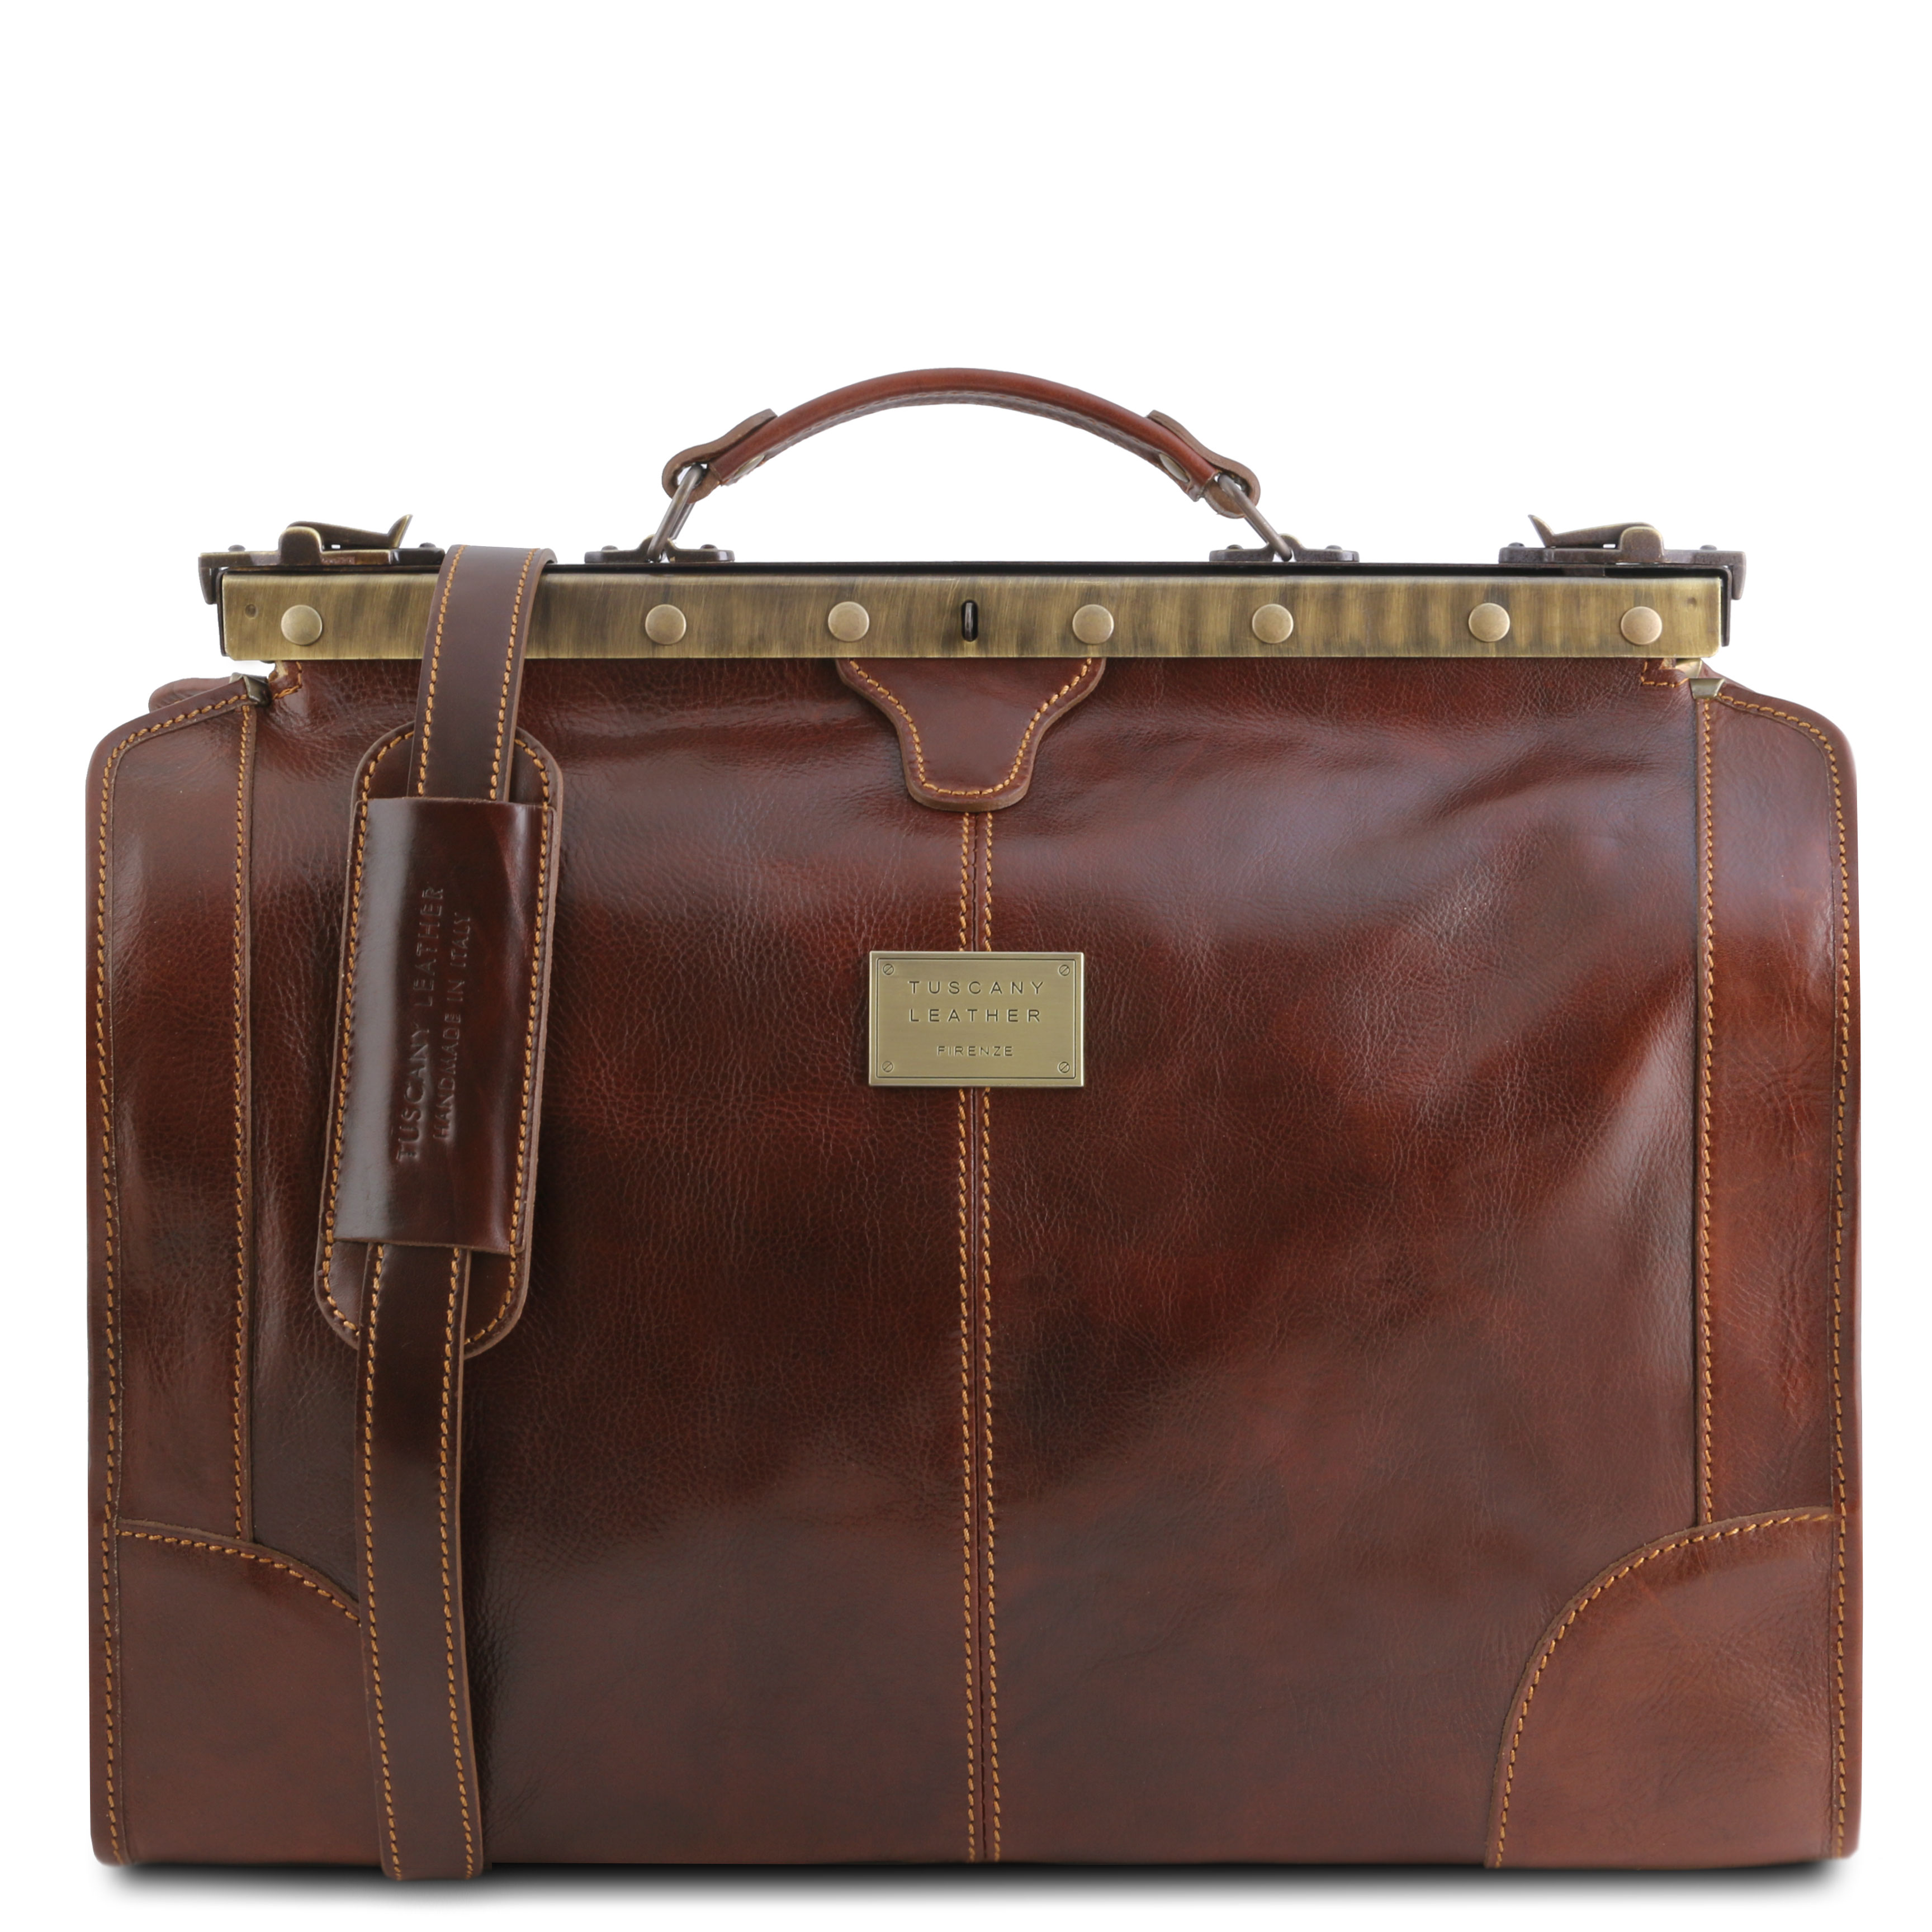 Madrid Gladstone Leather Bag - Small size Brown